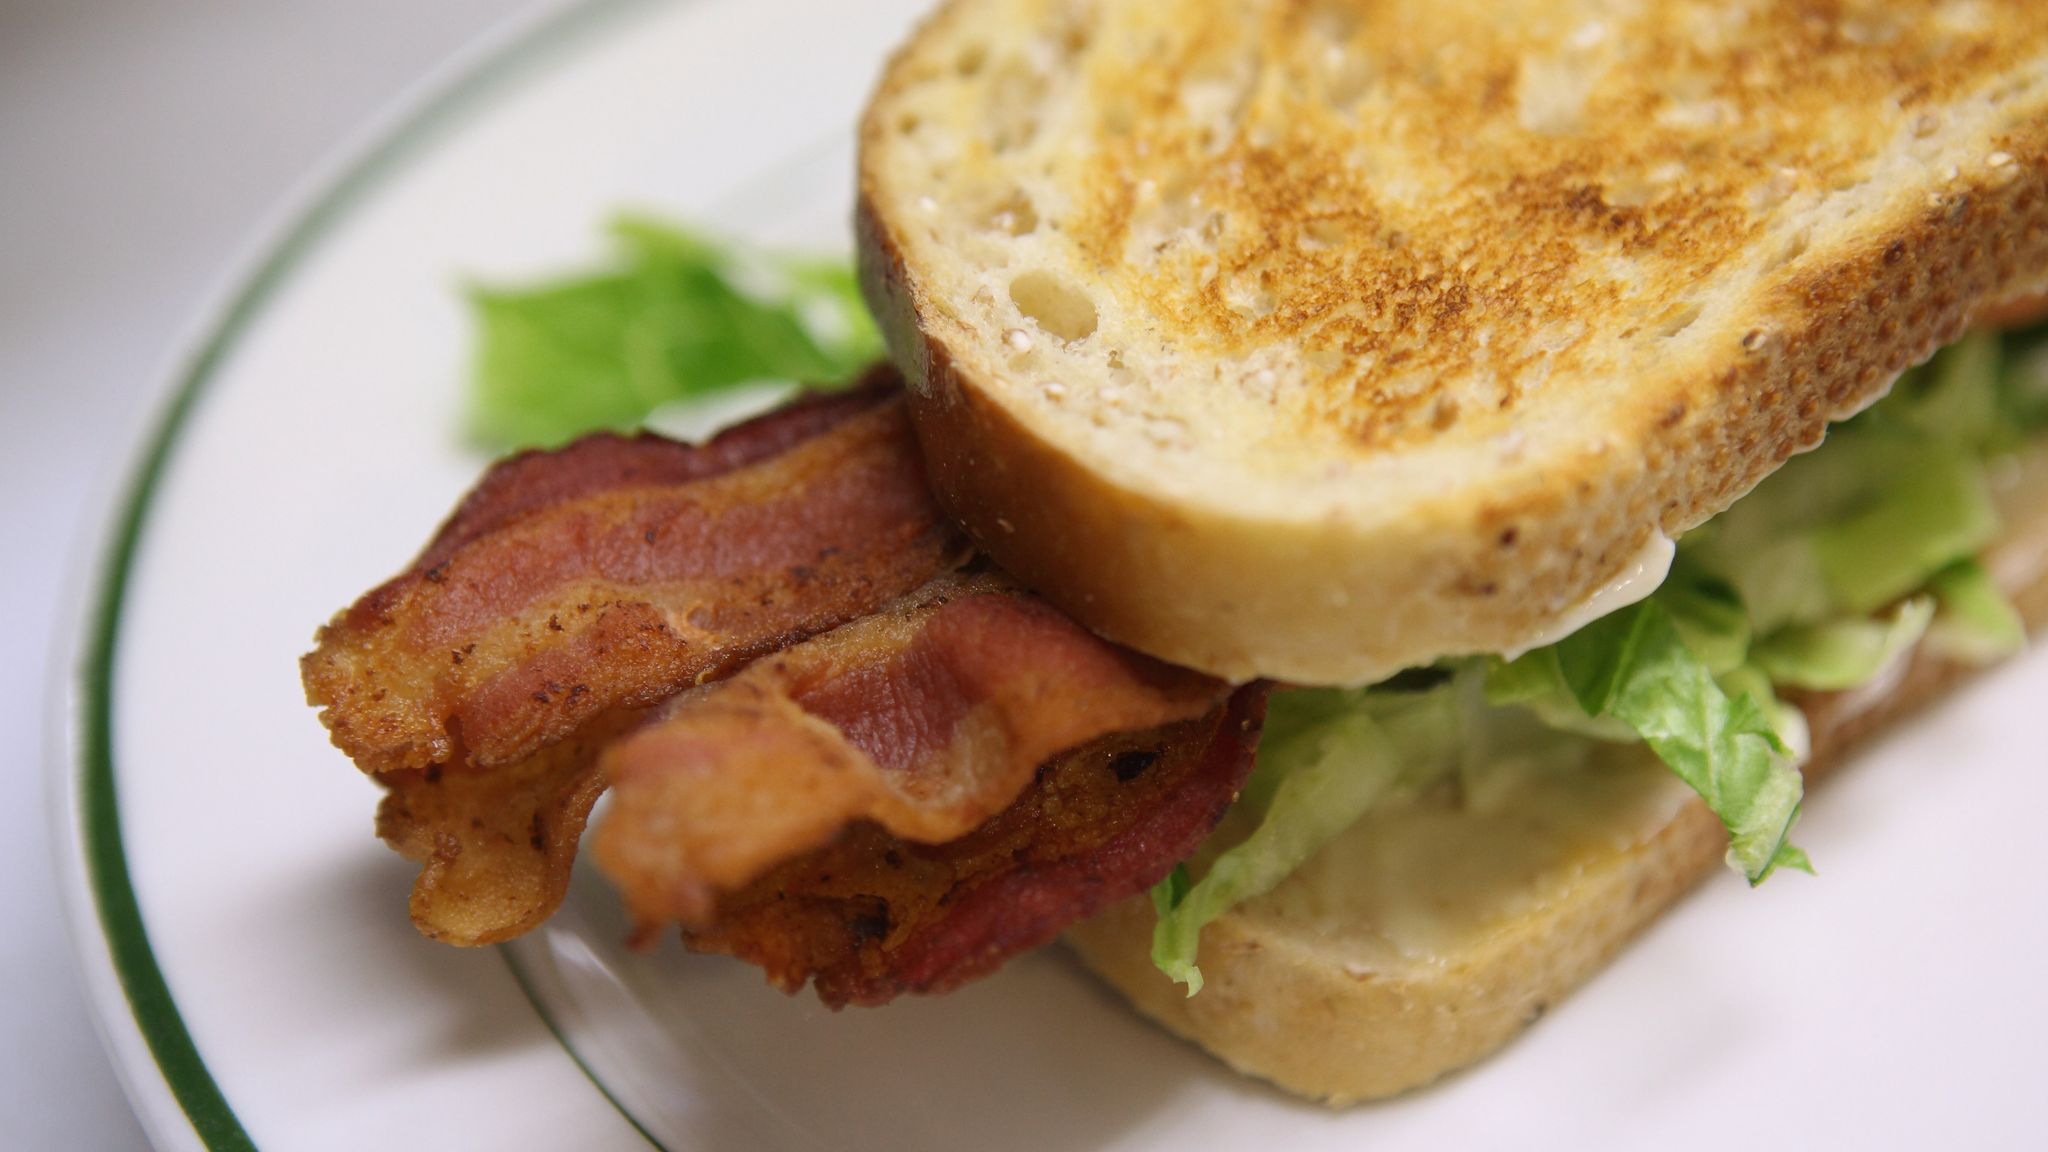 Makin' bacon healthy: Nitrite-free version launches in the UK for 2018